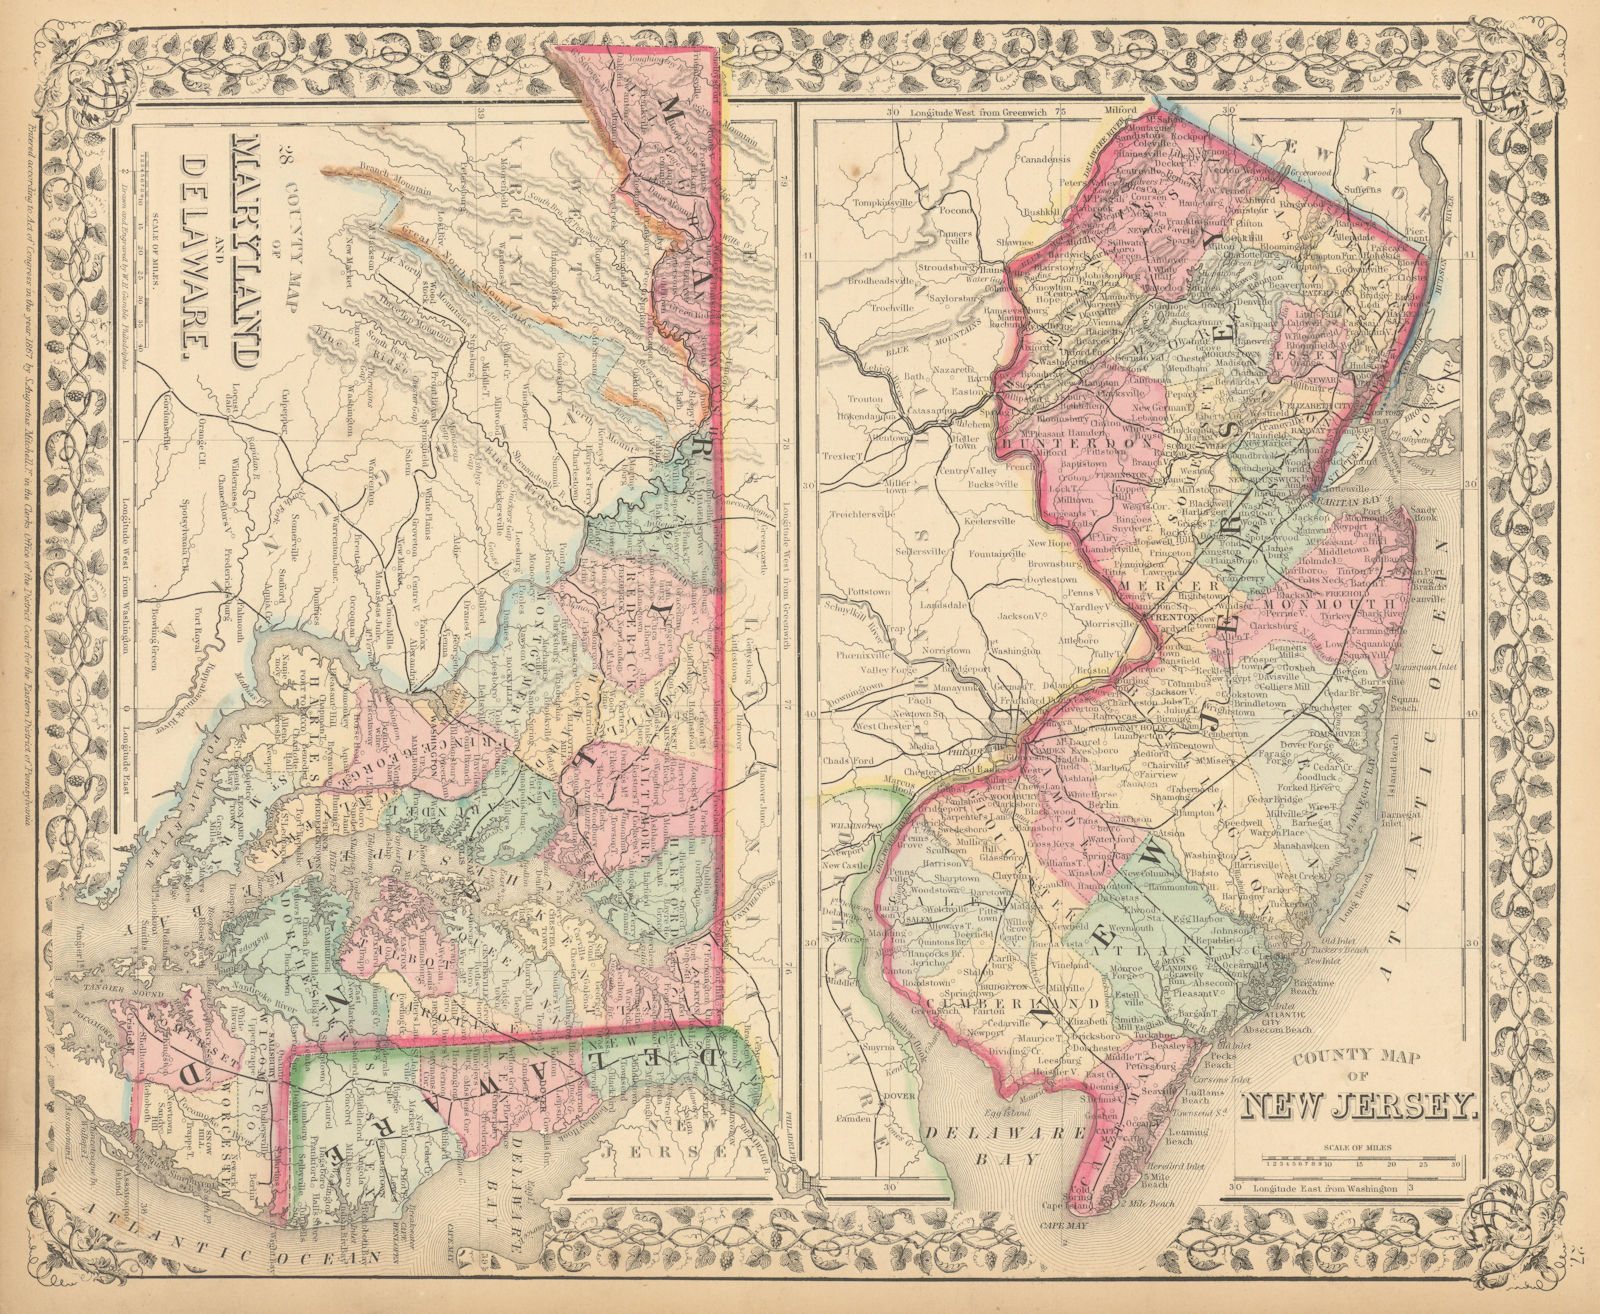 Associate Product County maps of New Jersey, Maryland & Delaware. State maps. MITCHELL 1869